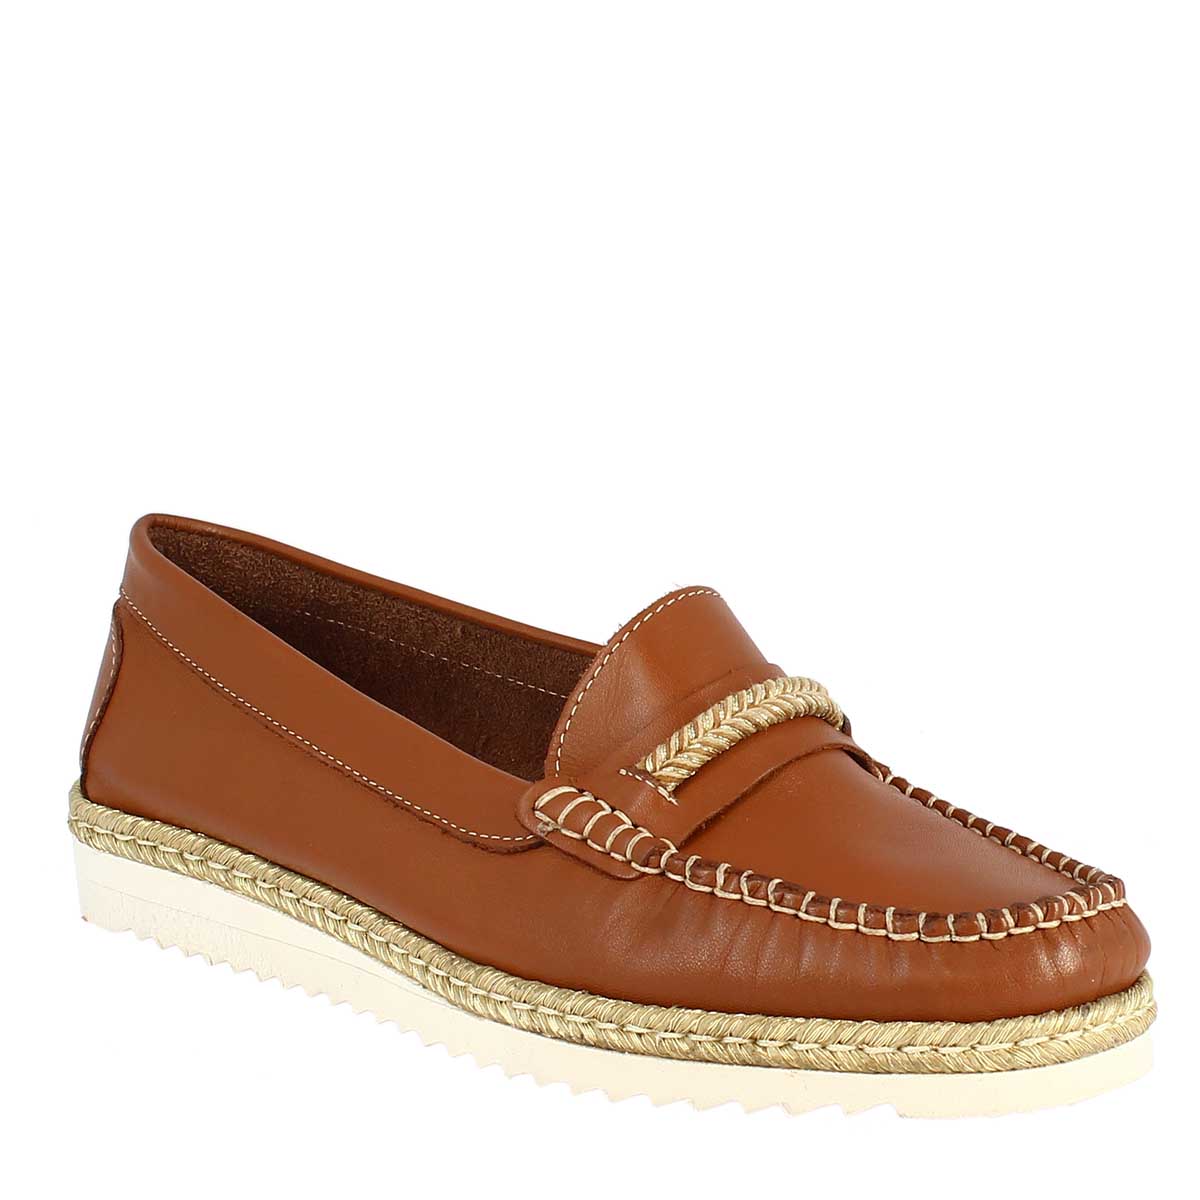 Women's round toe in brown LEATHER with details